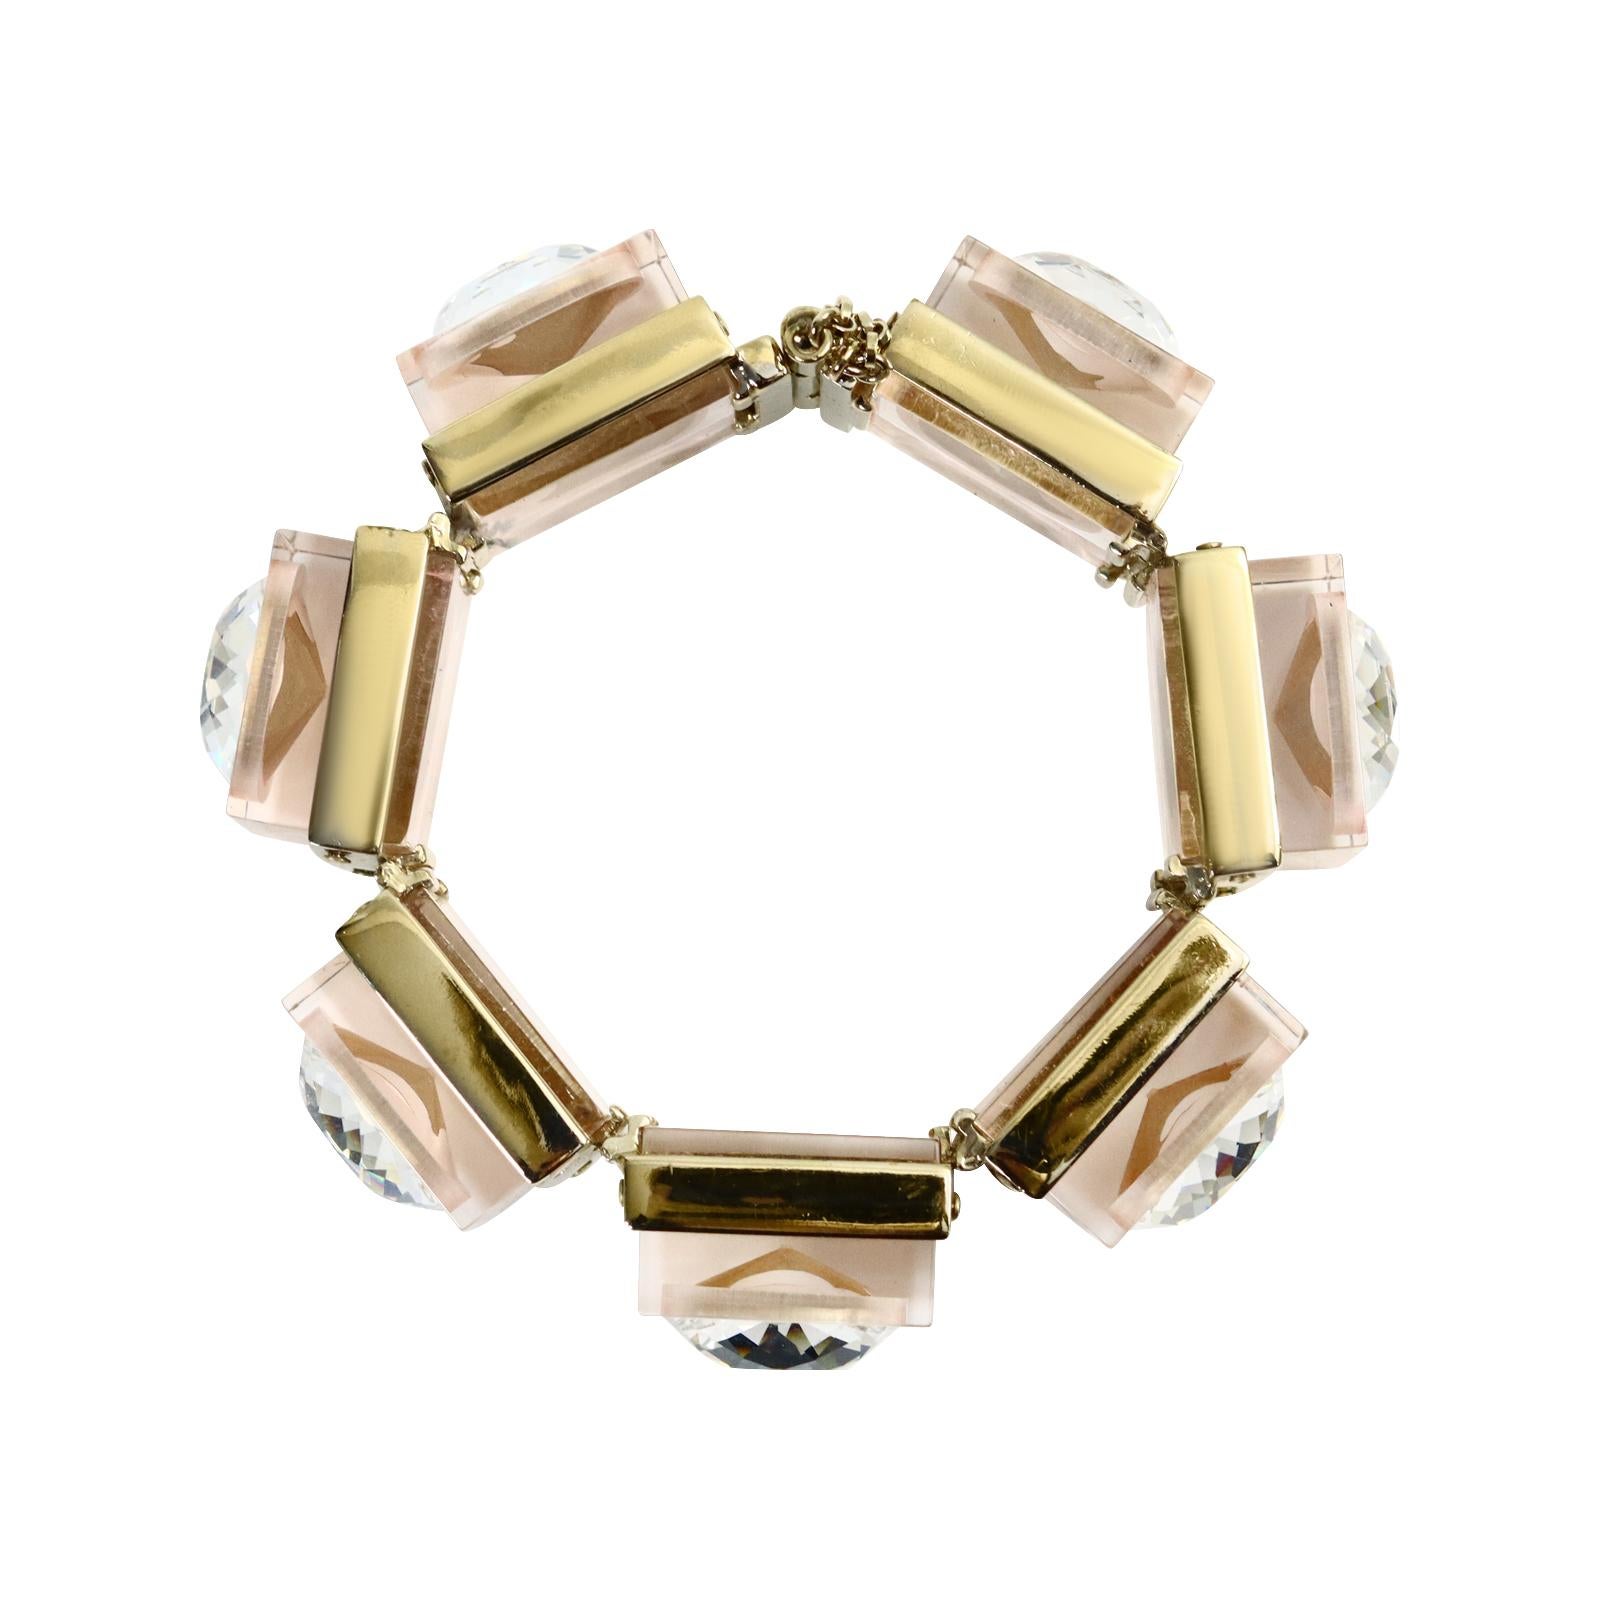 Vintage Nina Ricci Lucite Metal and Crystal Link Bracelet. Square Links set in gold  tone metal and then in lucite resin and then embedded with a large faceted cut Crystal form this bracelet.  It has a slightly smoky beige  color.  Closes with a pin